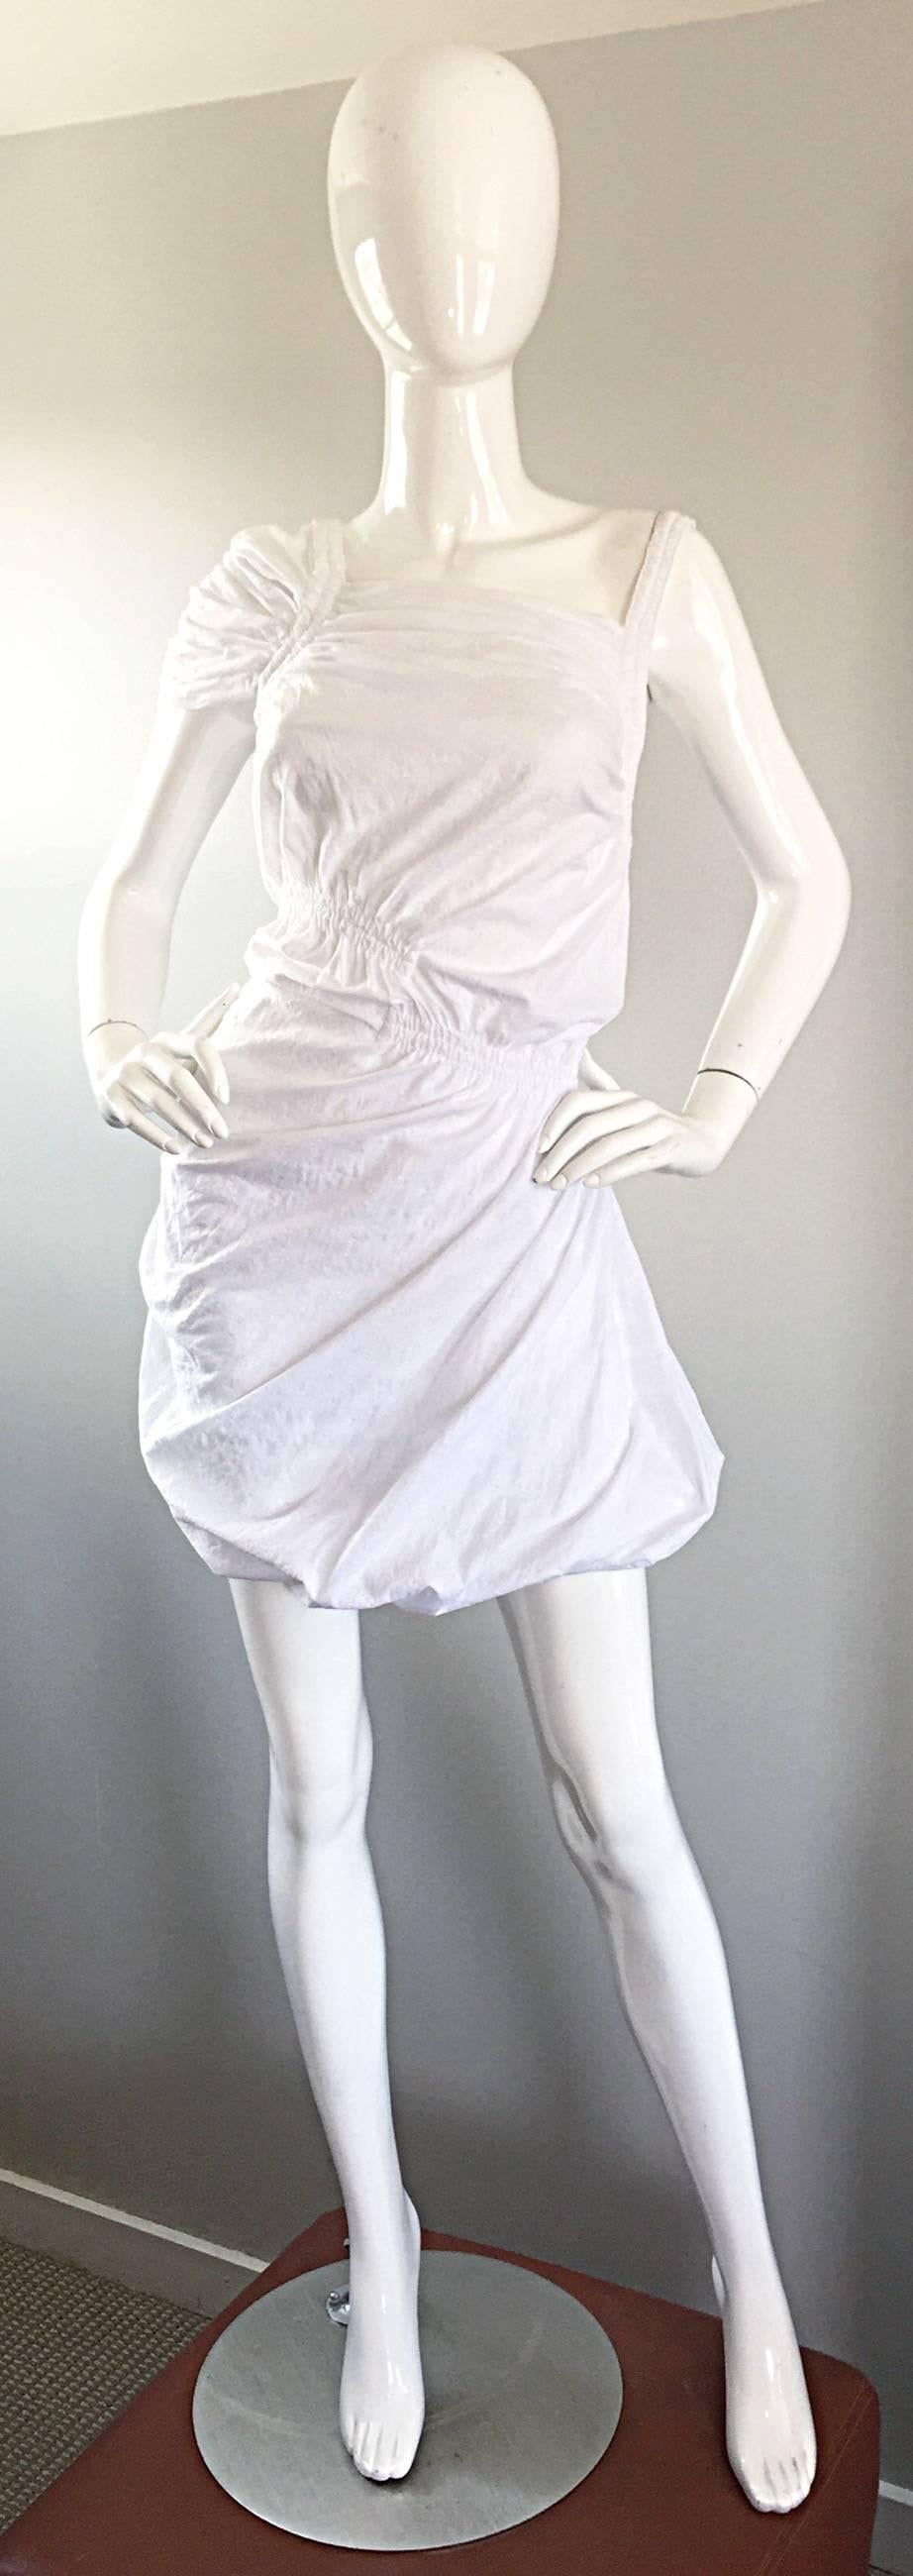 Brand new THAKOON white cotton asymmetrical mini dress! Purchased from SAKS in San Francisco for $1,550--Never been worn! Luxurious soft cotton, with elastic at waist, shoulder and hem. Features one cap sleeve and one sleeveless strap. Hidden zipper